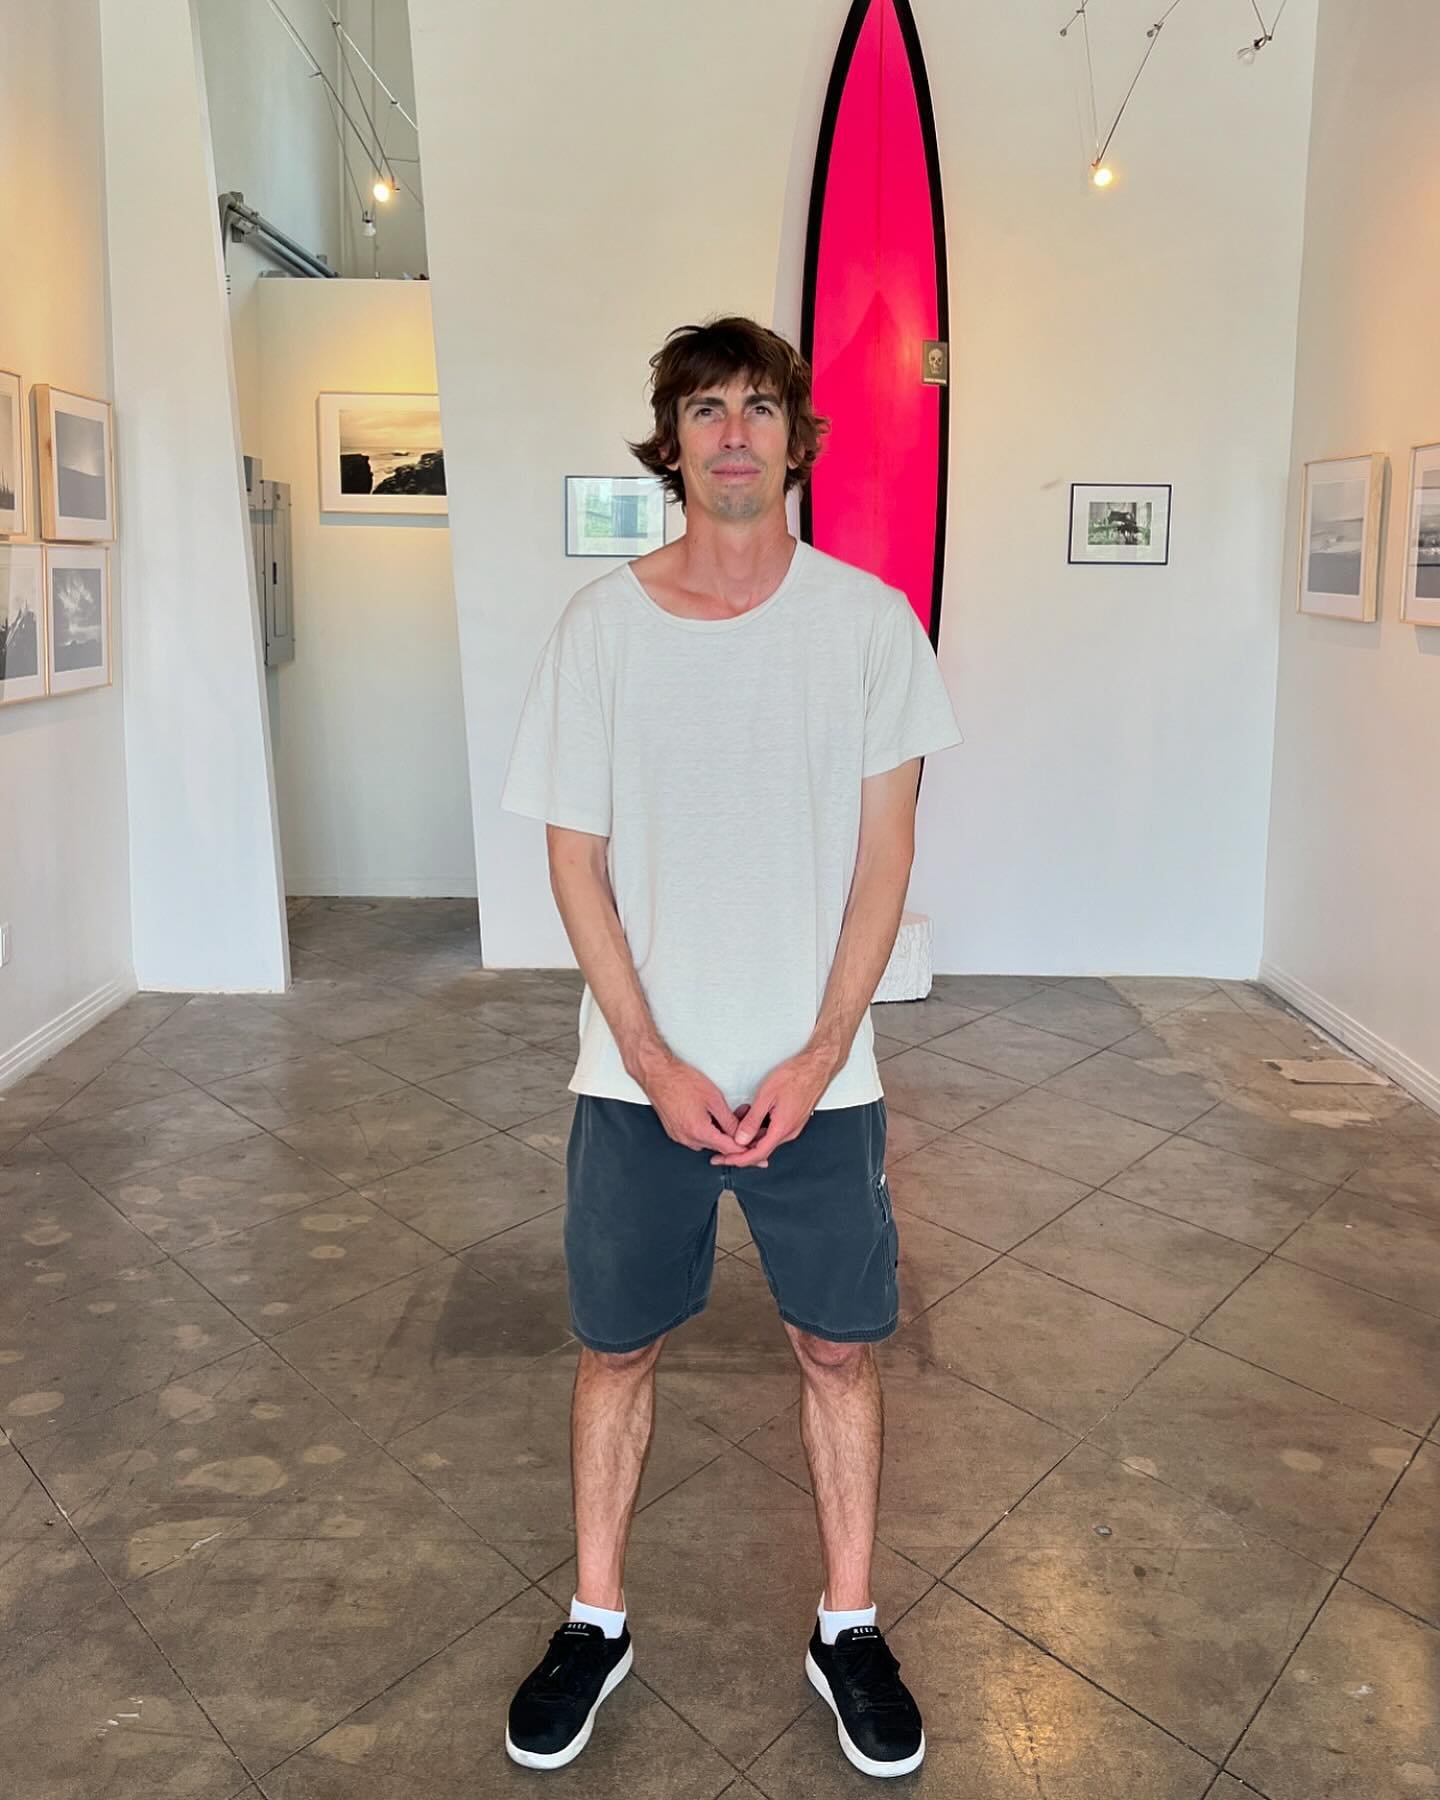 Massive thank you and congratulations to this man @rustylong + cohorts @tyler_warren and @chris_christenson73 for an incredible exhibition. 

Last night&rsquo;s opening at Made Solid was packed with friend and family - well lubricated thanks to @ocea